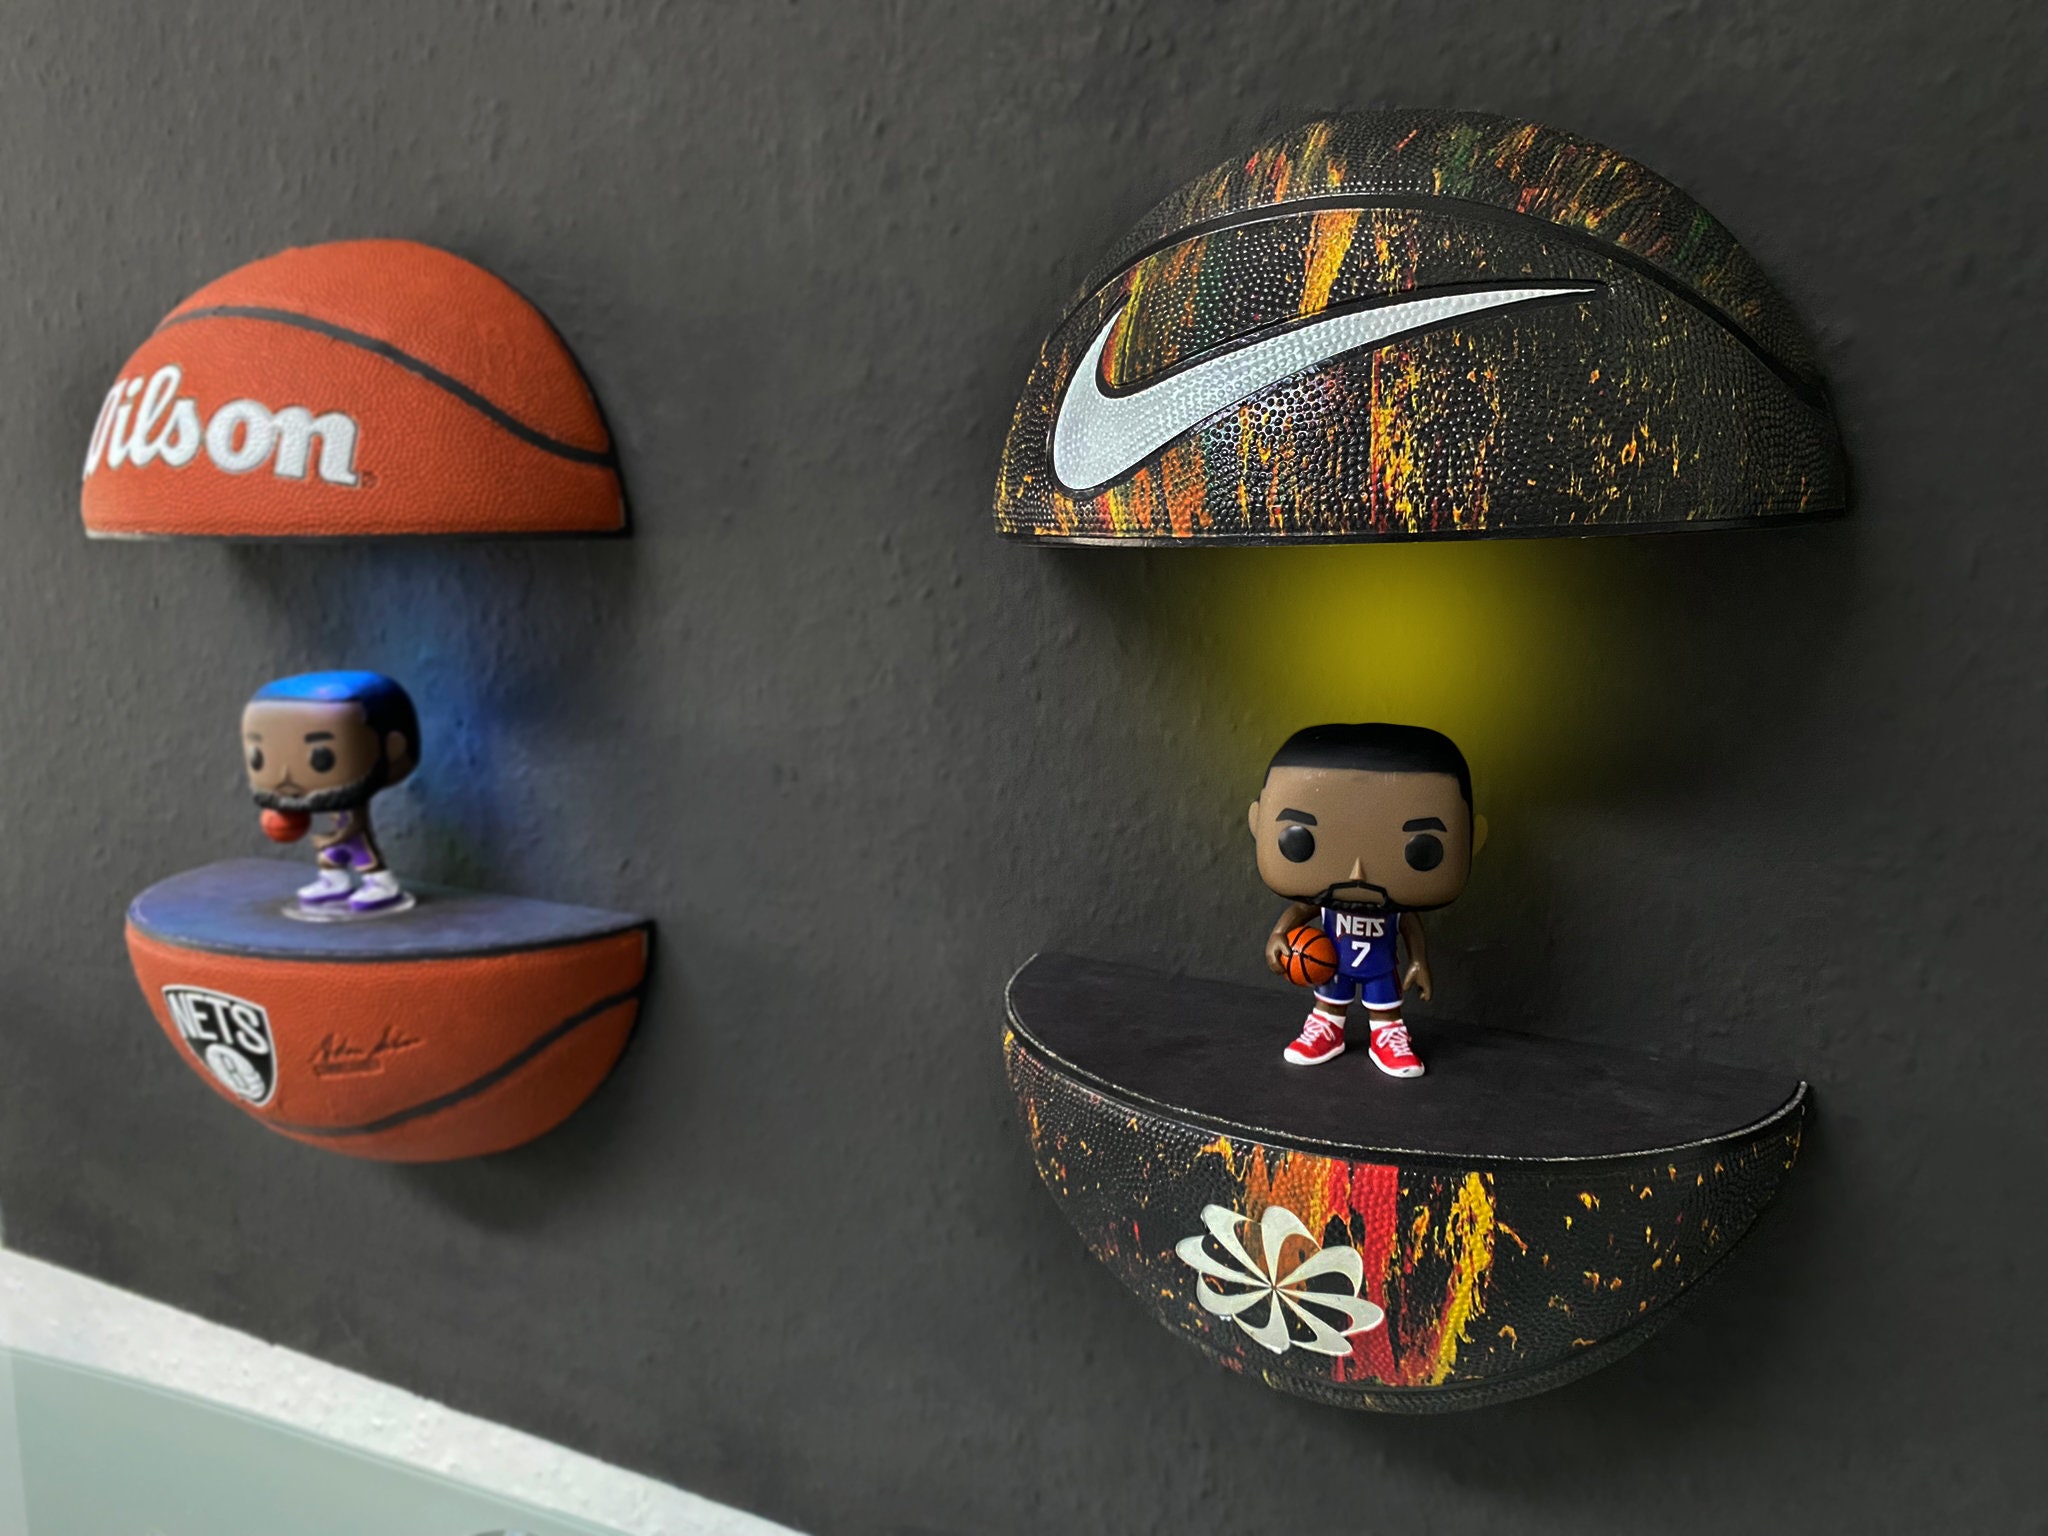 Does the NBA use the same ball we can buy off the shelf